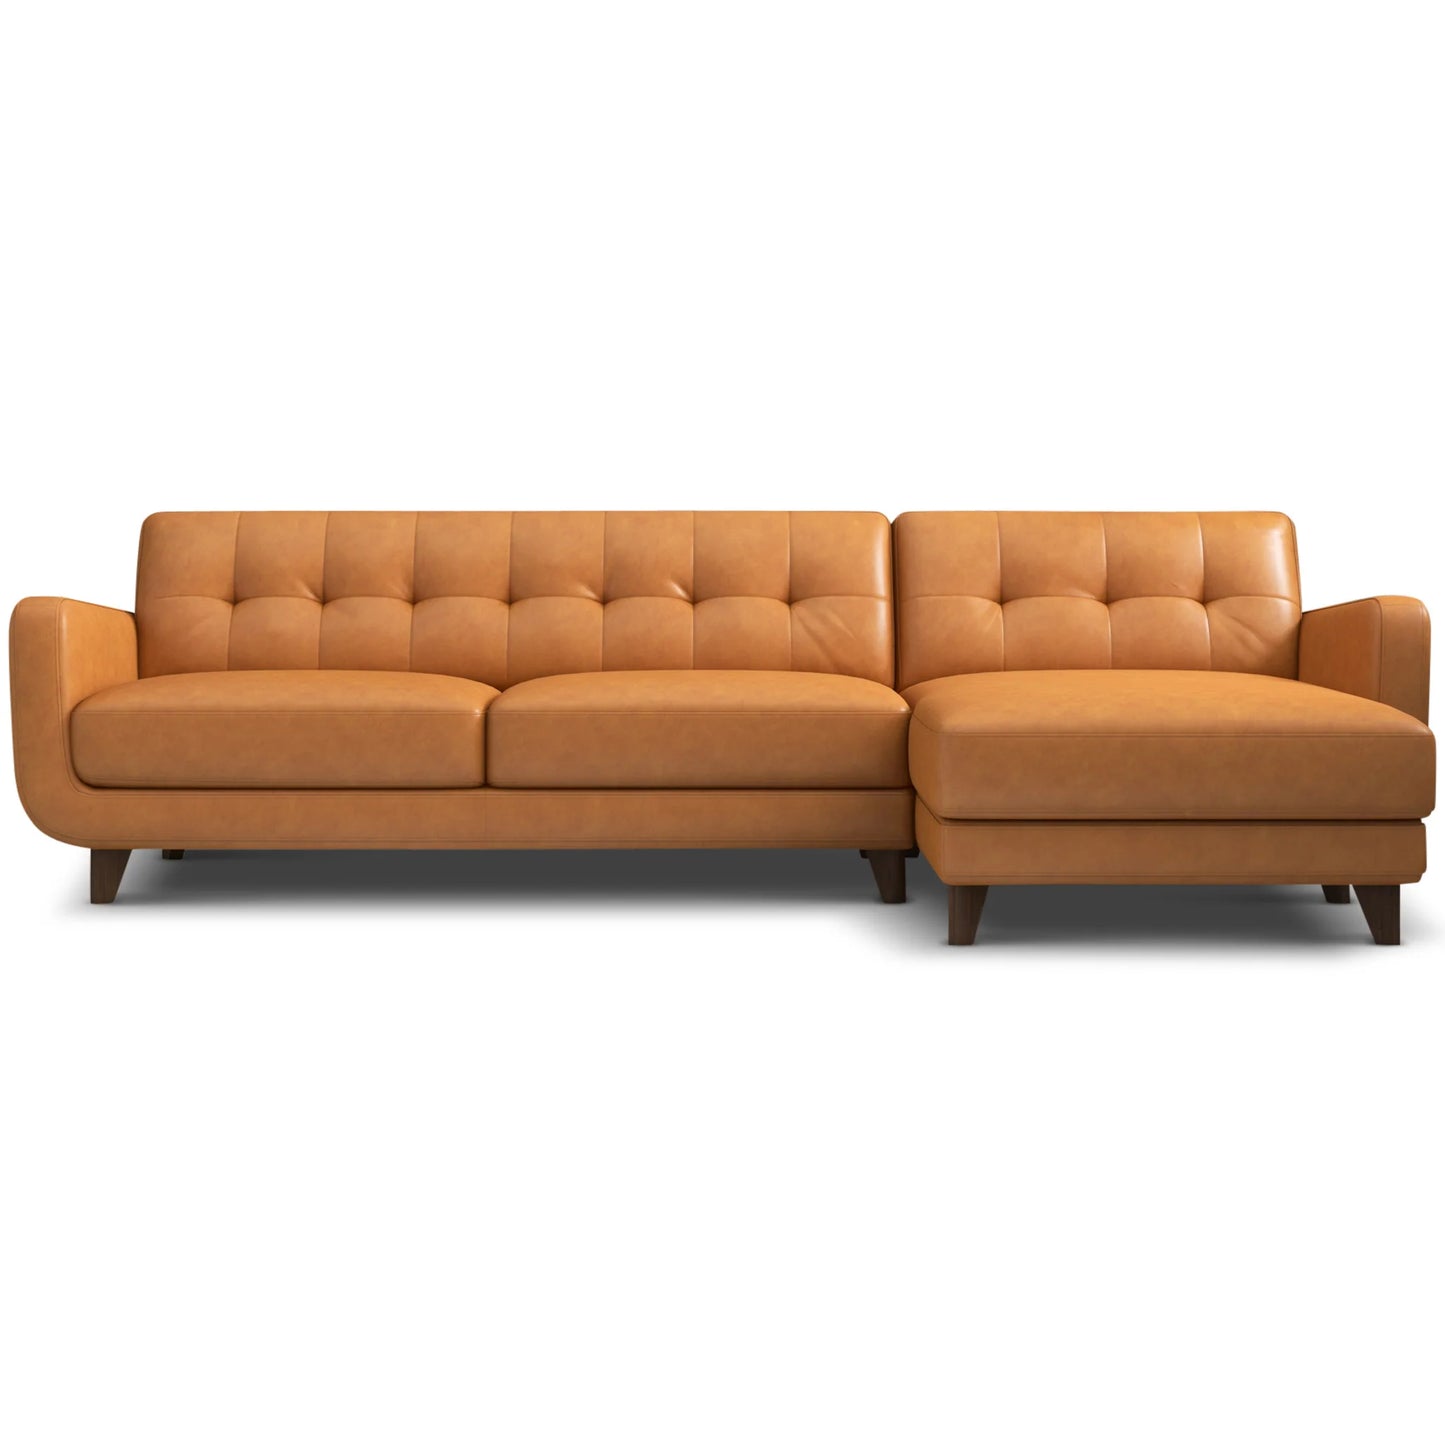 Cassie Tan Leather Sectional Sofa Right Facing Chaise